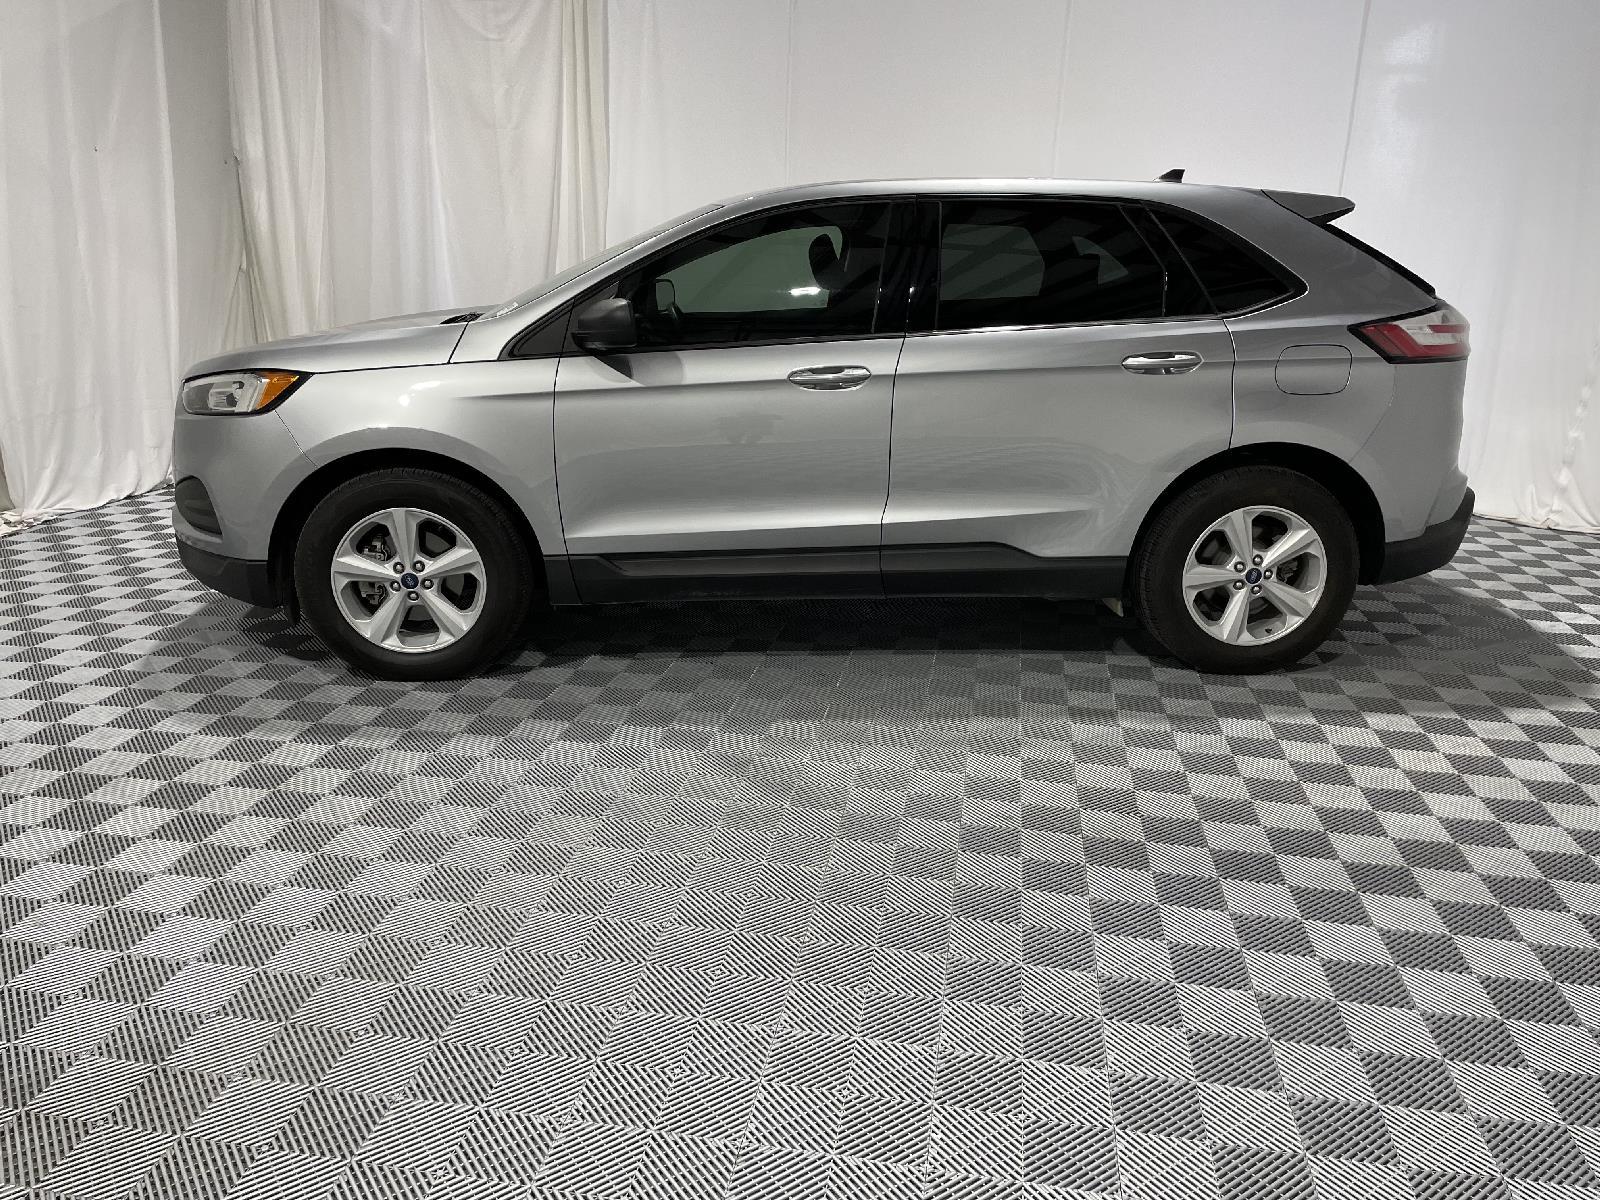 Used 2020 Ford Edge SE SUV for sale in St Joseph MO